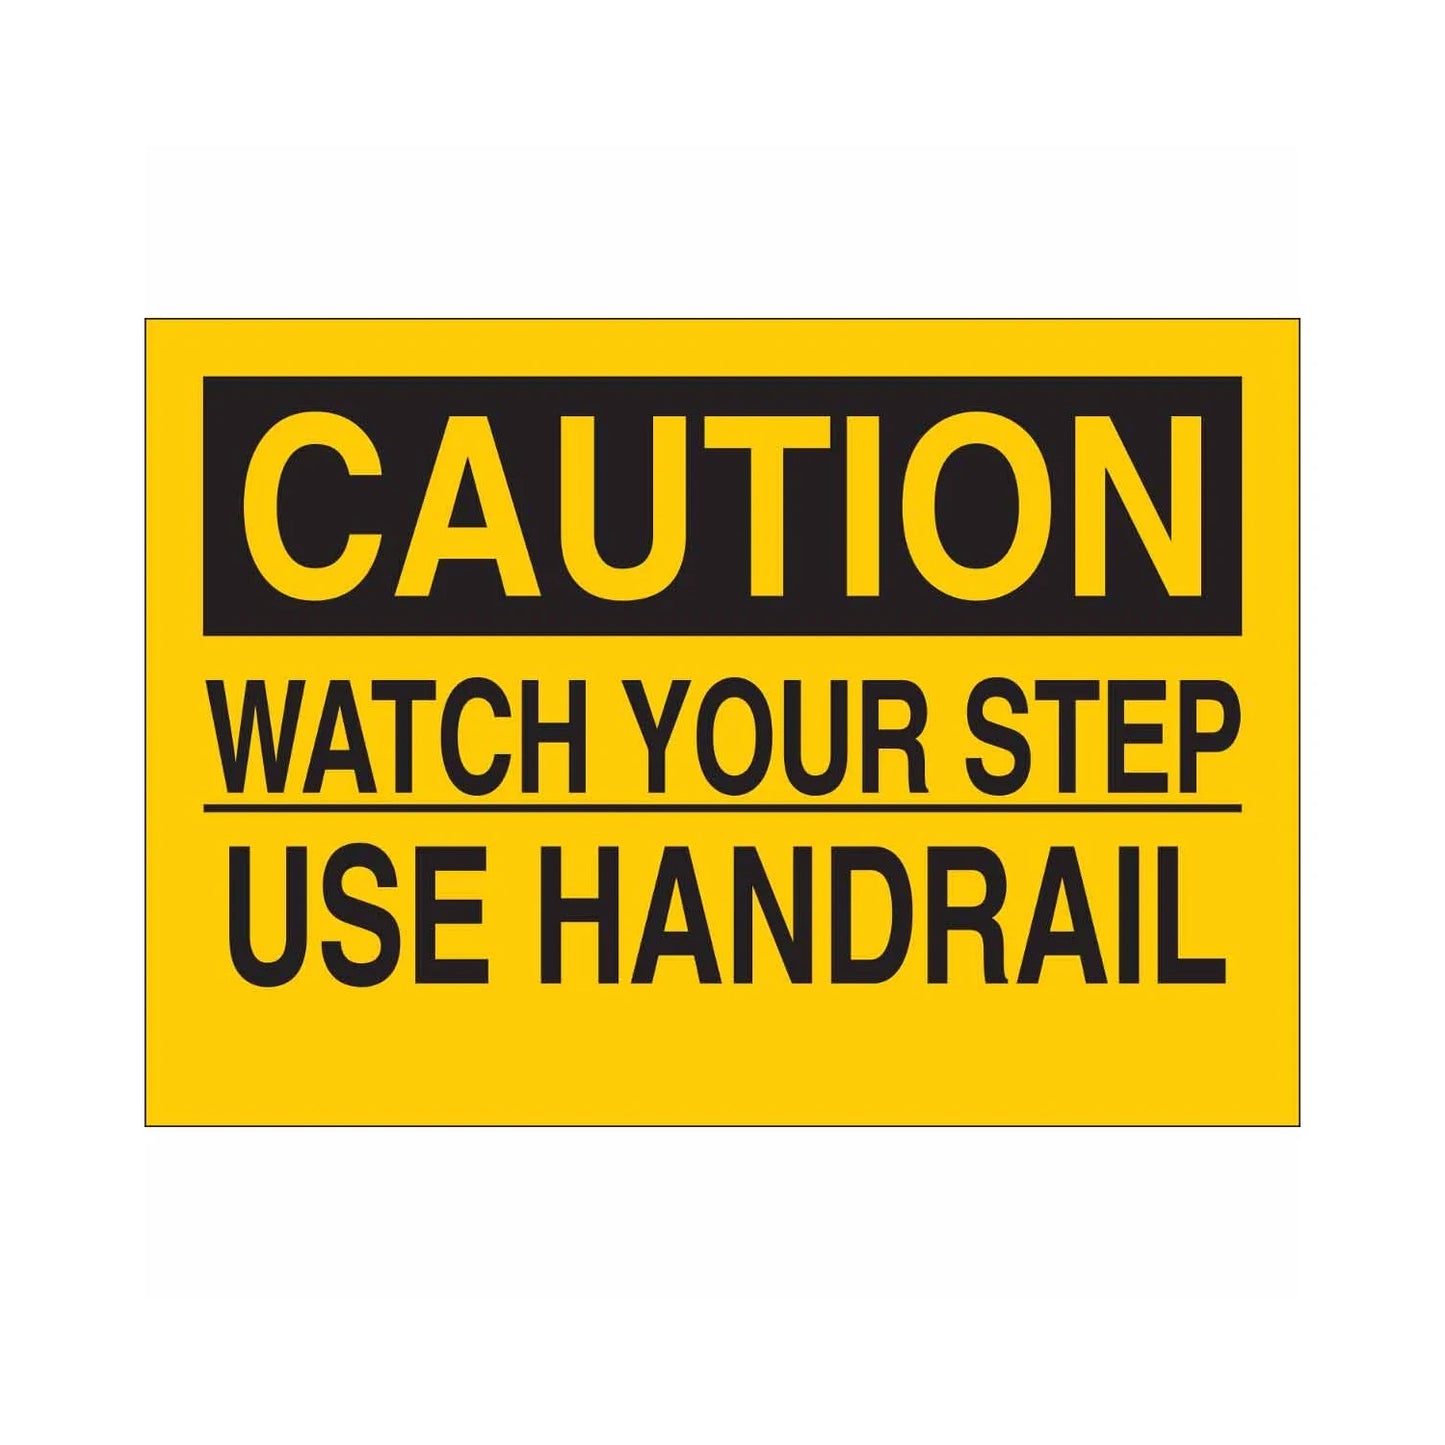 CAUTION Watch Your Step Use Handrail Sign